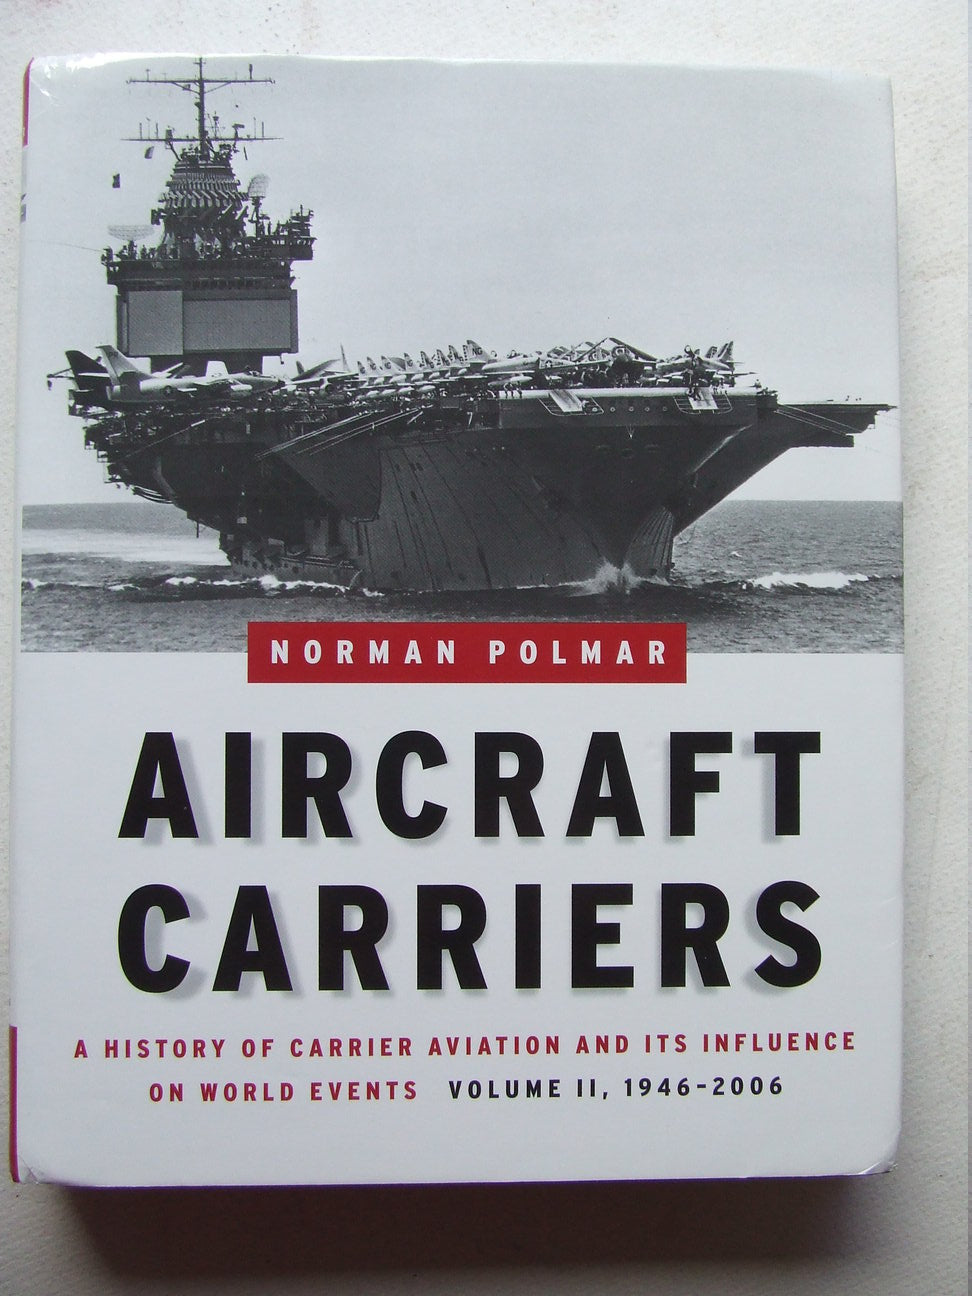 Aircraft Carriers, a history of carrier aviation and its influence on world events